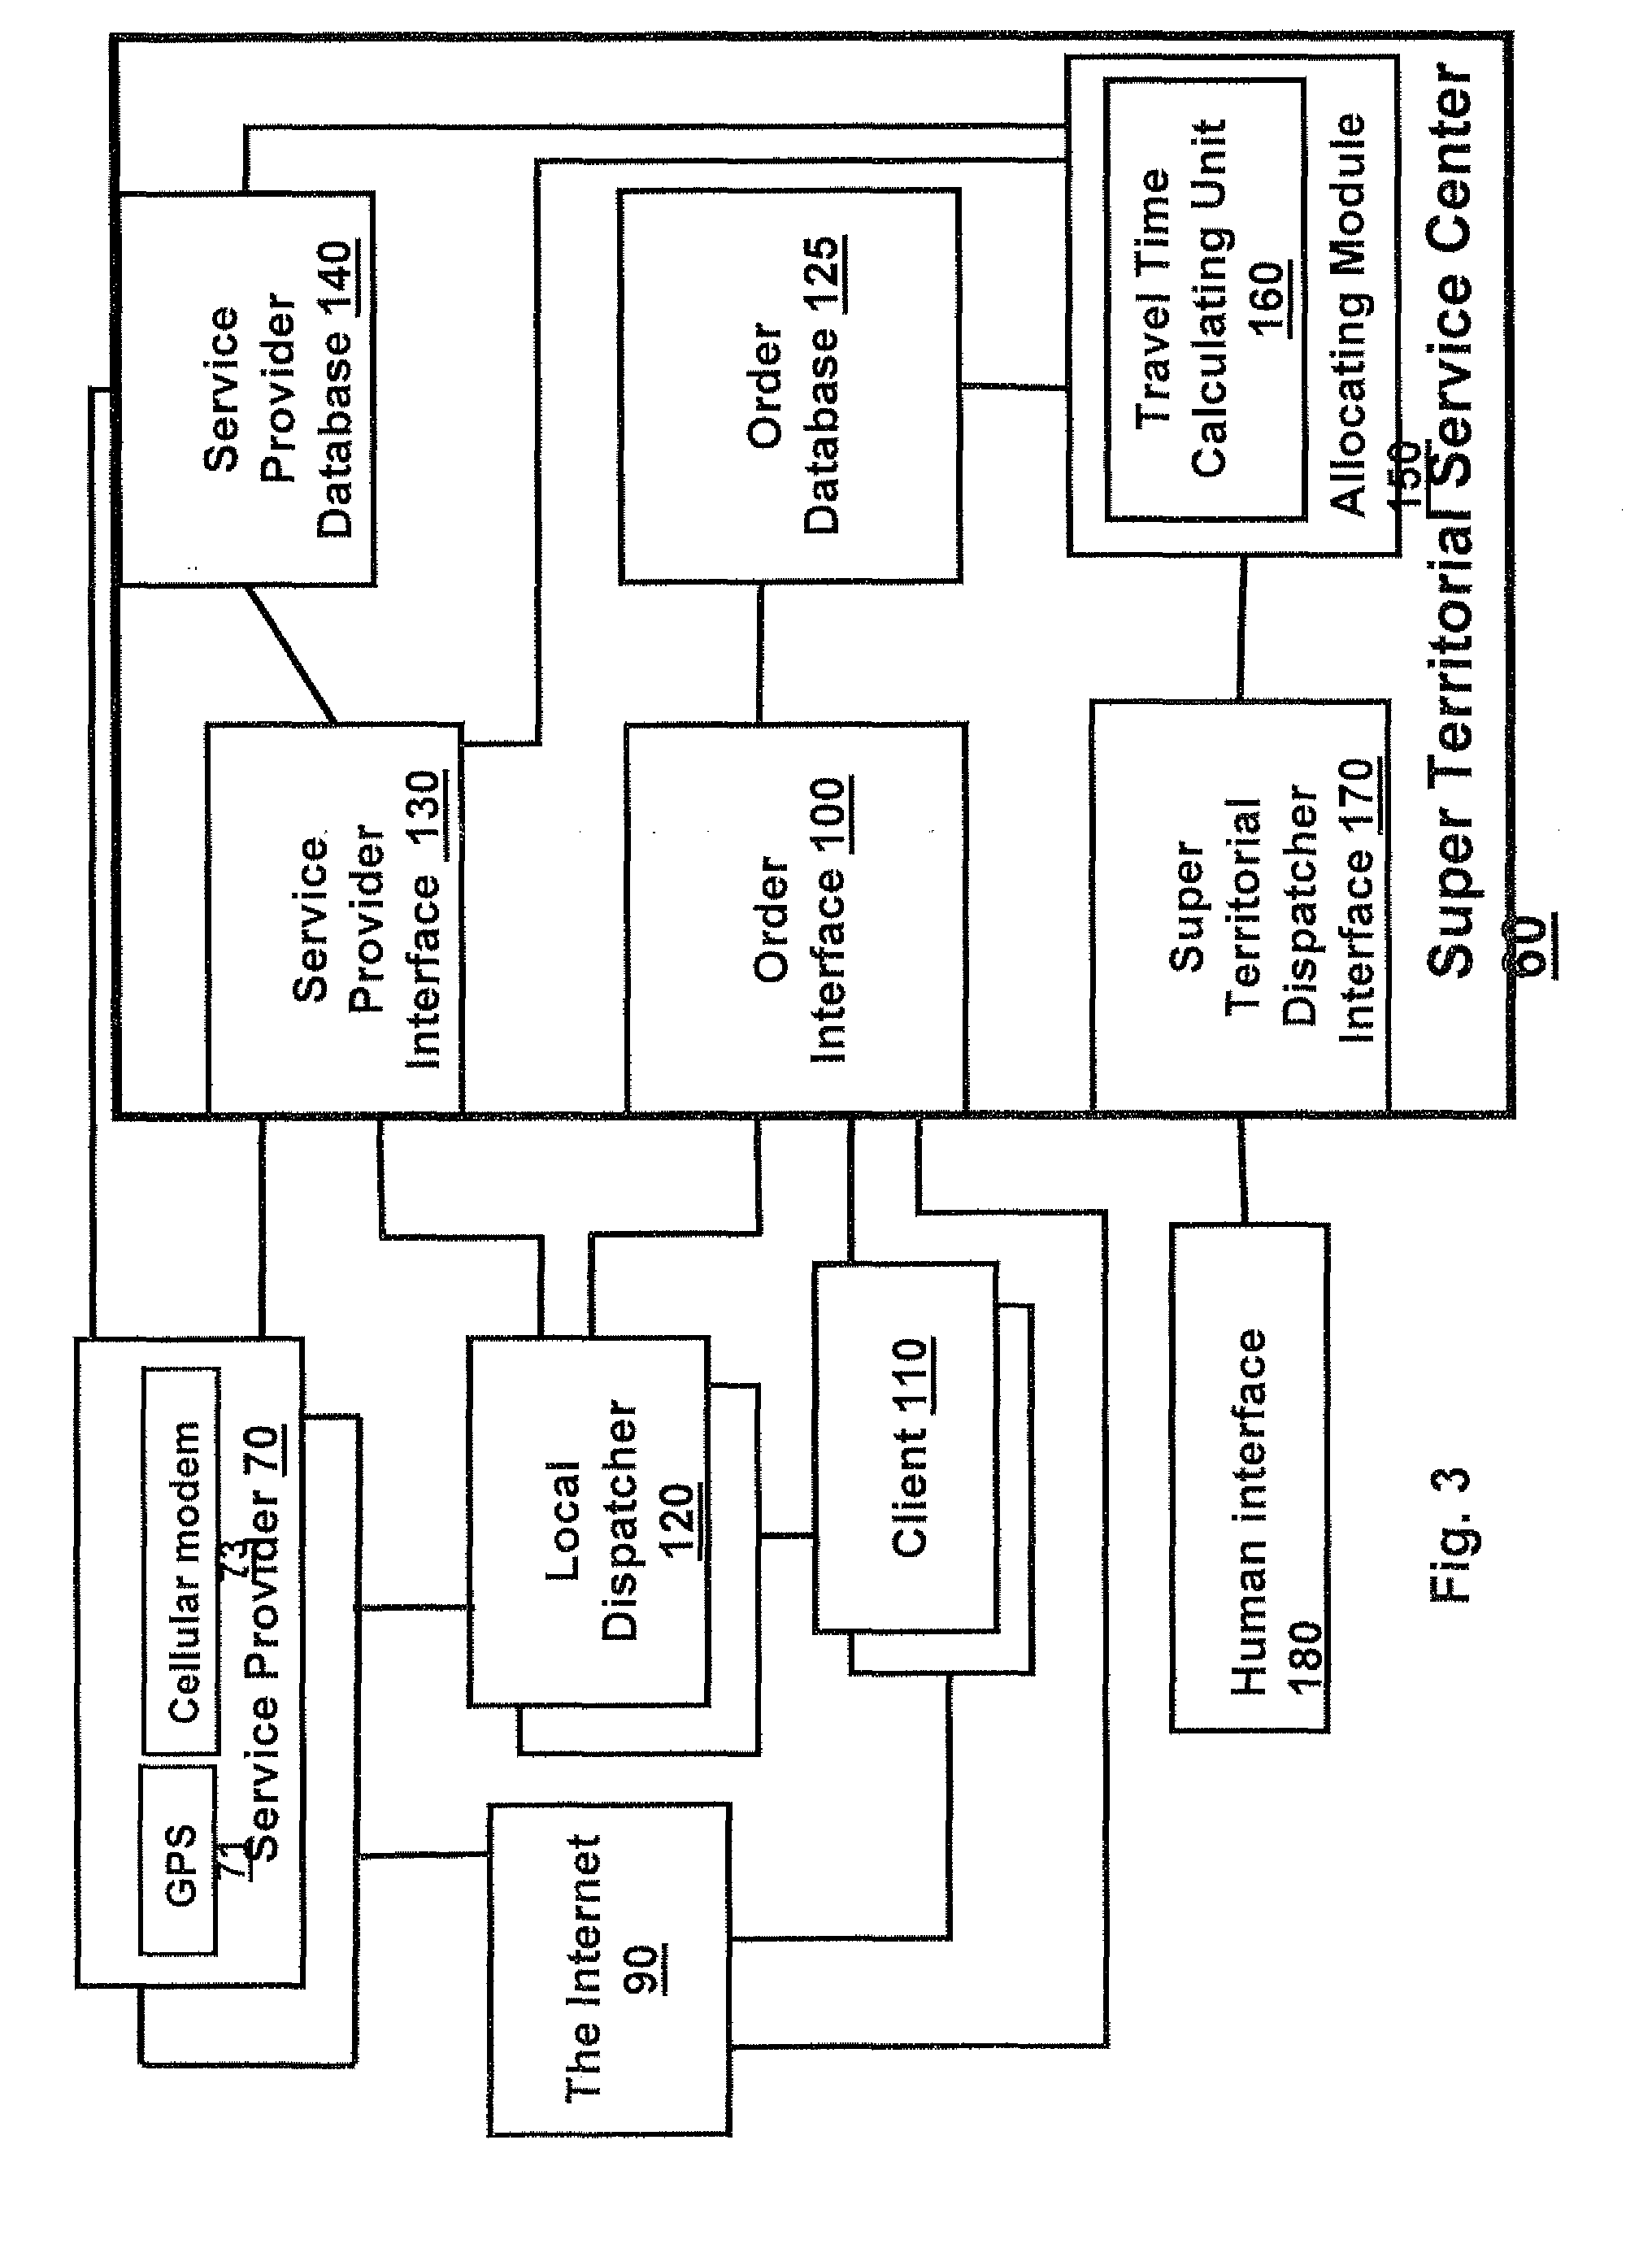 Method and system for cab management